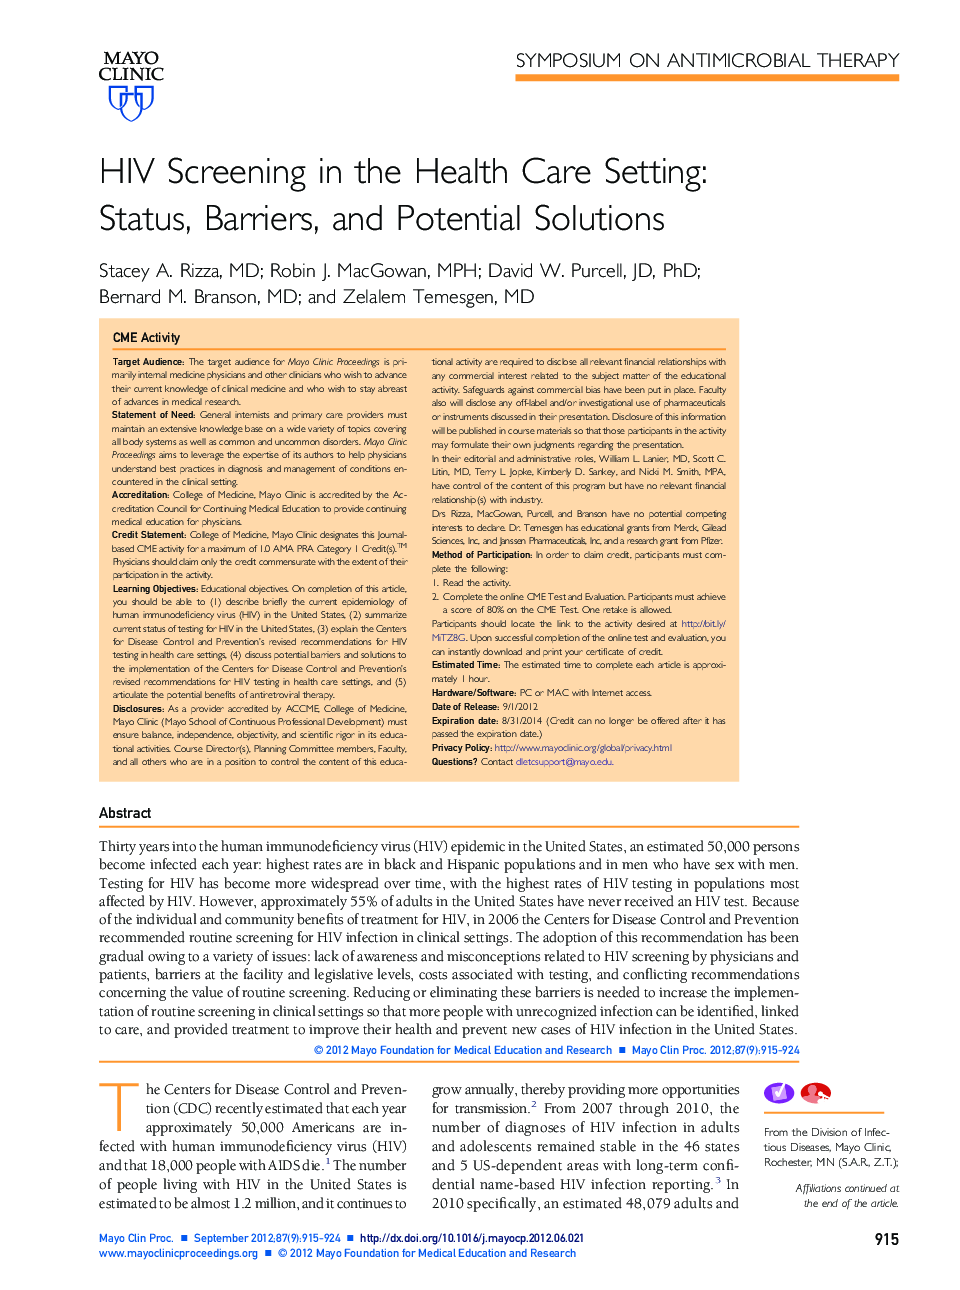 HIV Screening in the Health Care Setting: Status, Barriers, and Potential Solutions